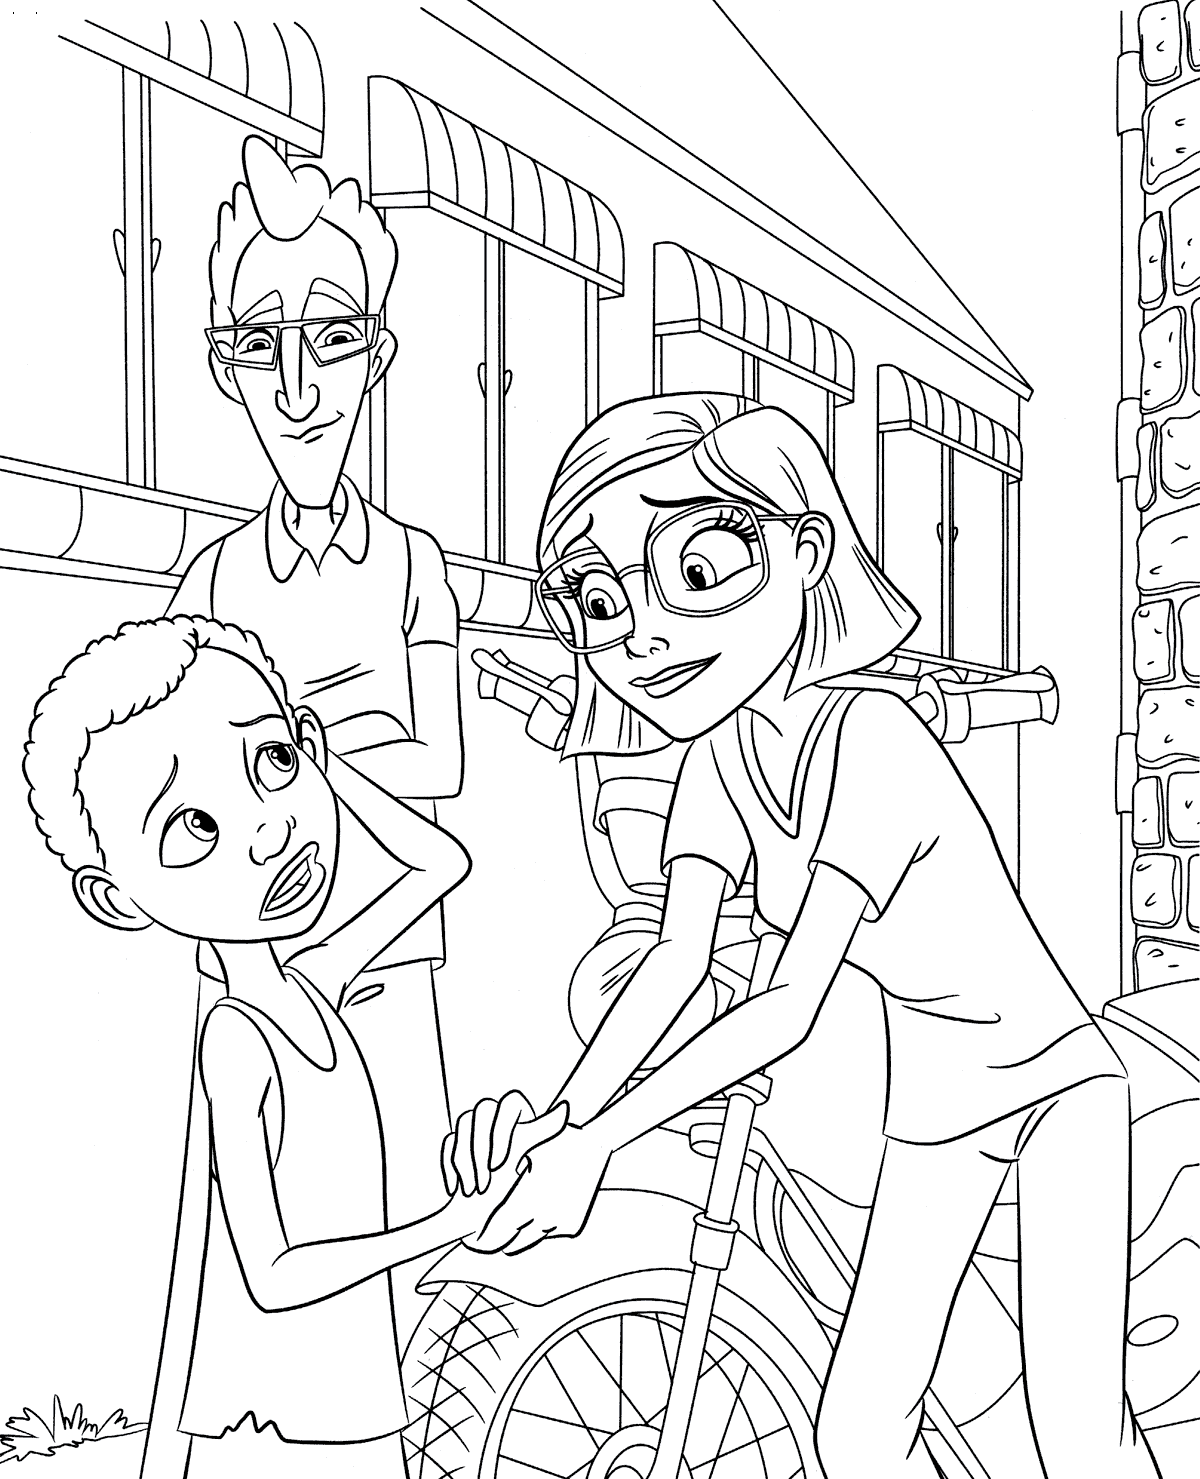 Coloring page - Grateful tourists